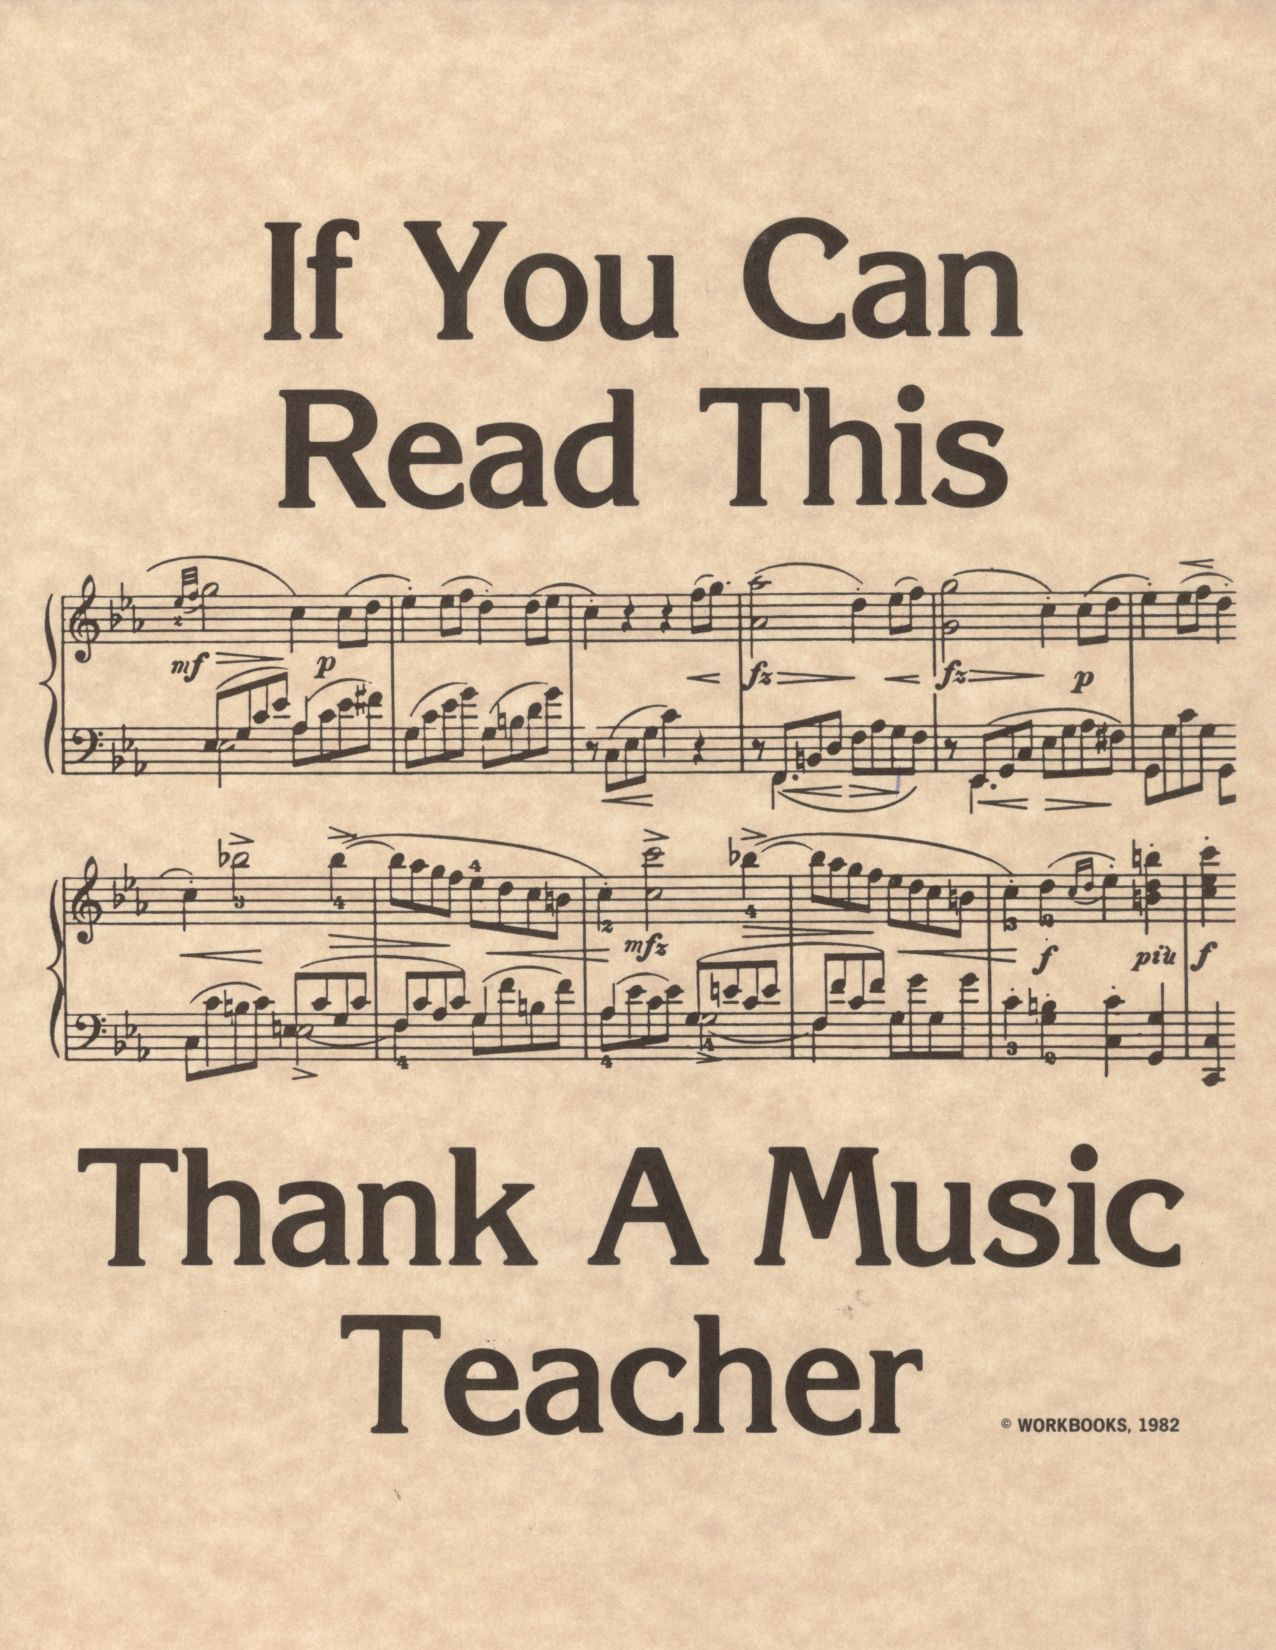 Quote About Music Education
 Thank your music teacher if you understand the language